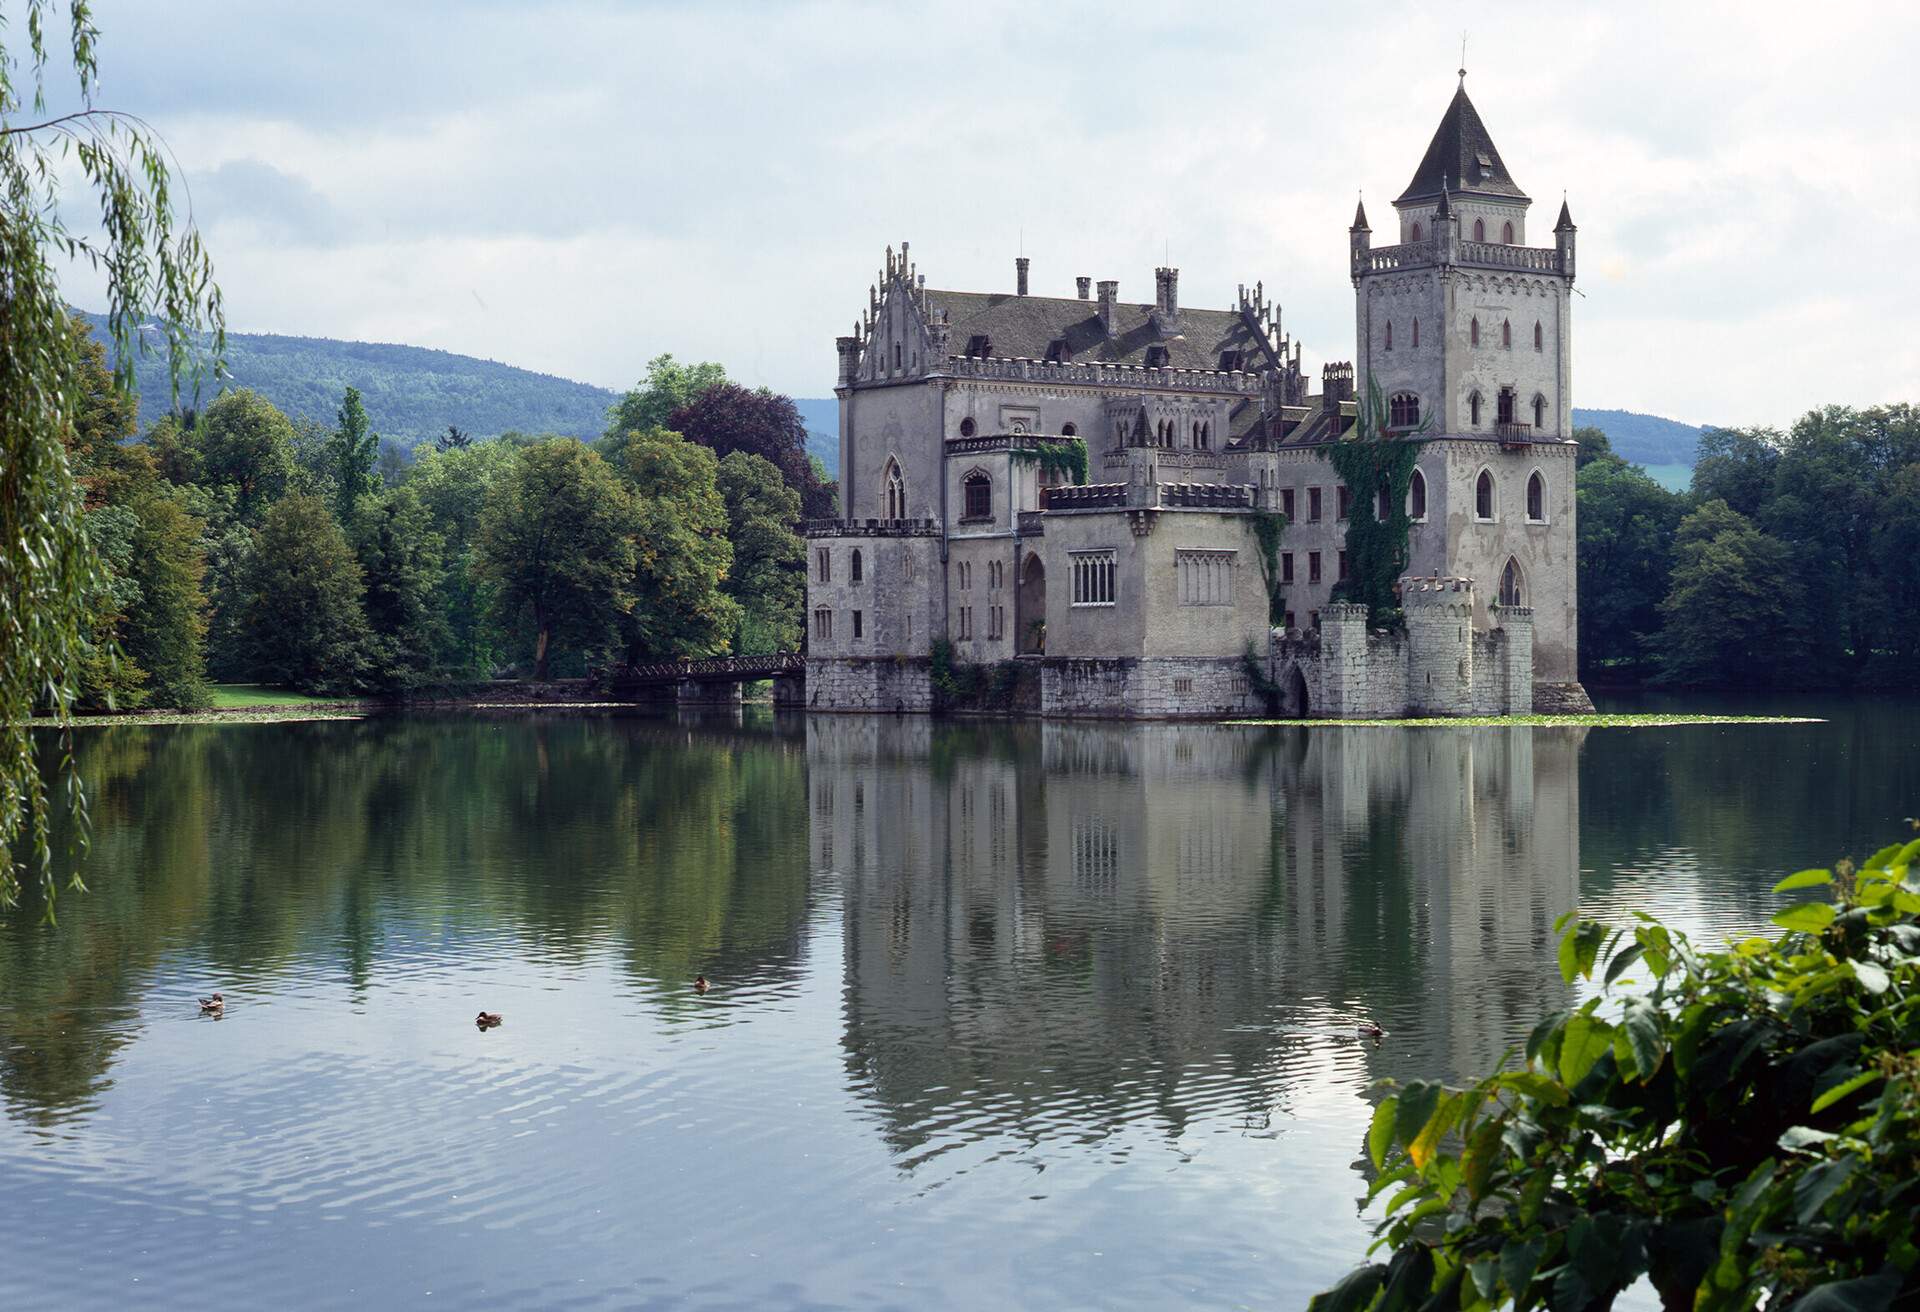 A low-lying water castle surrounded by a forest of trees and distant mountains.